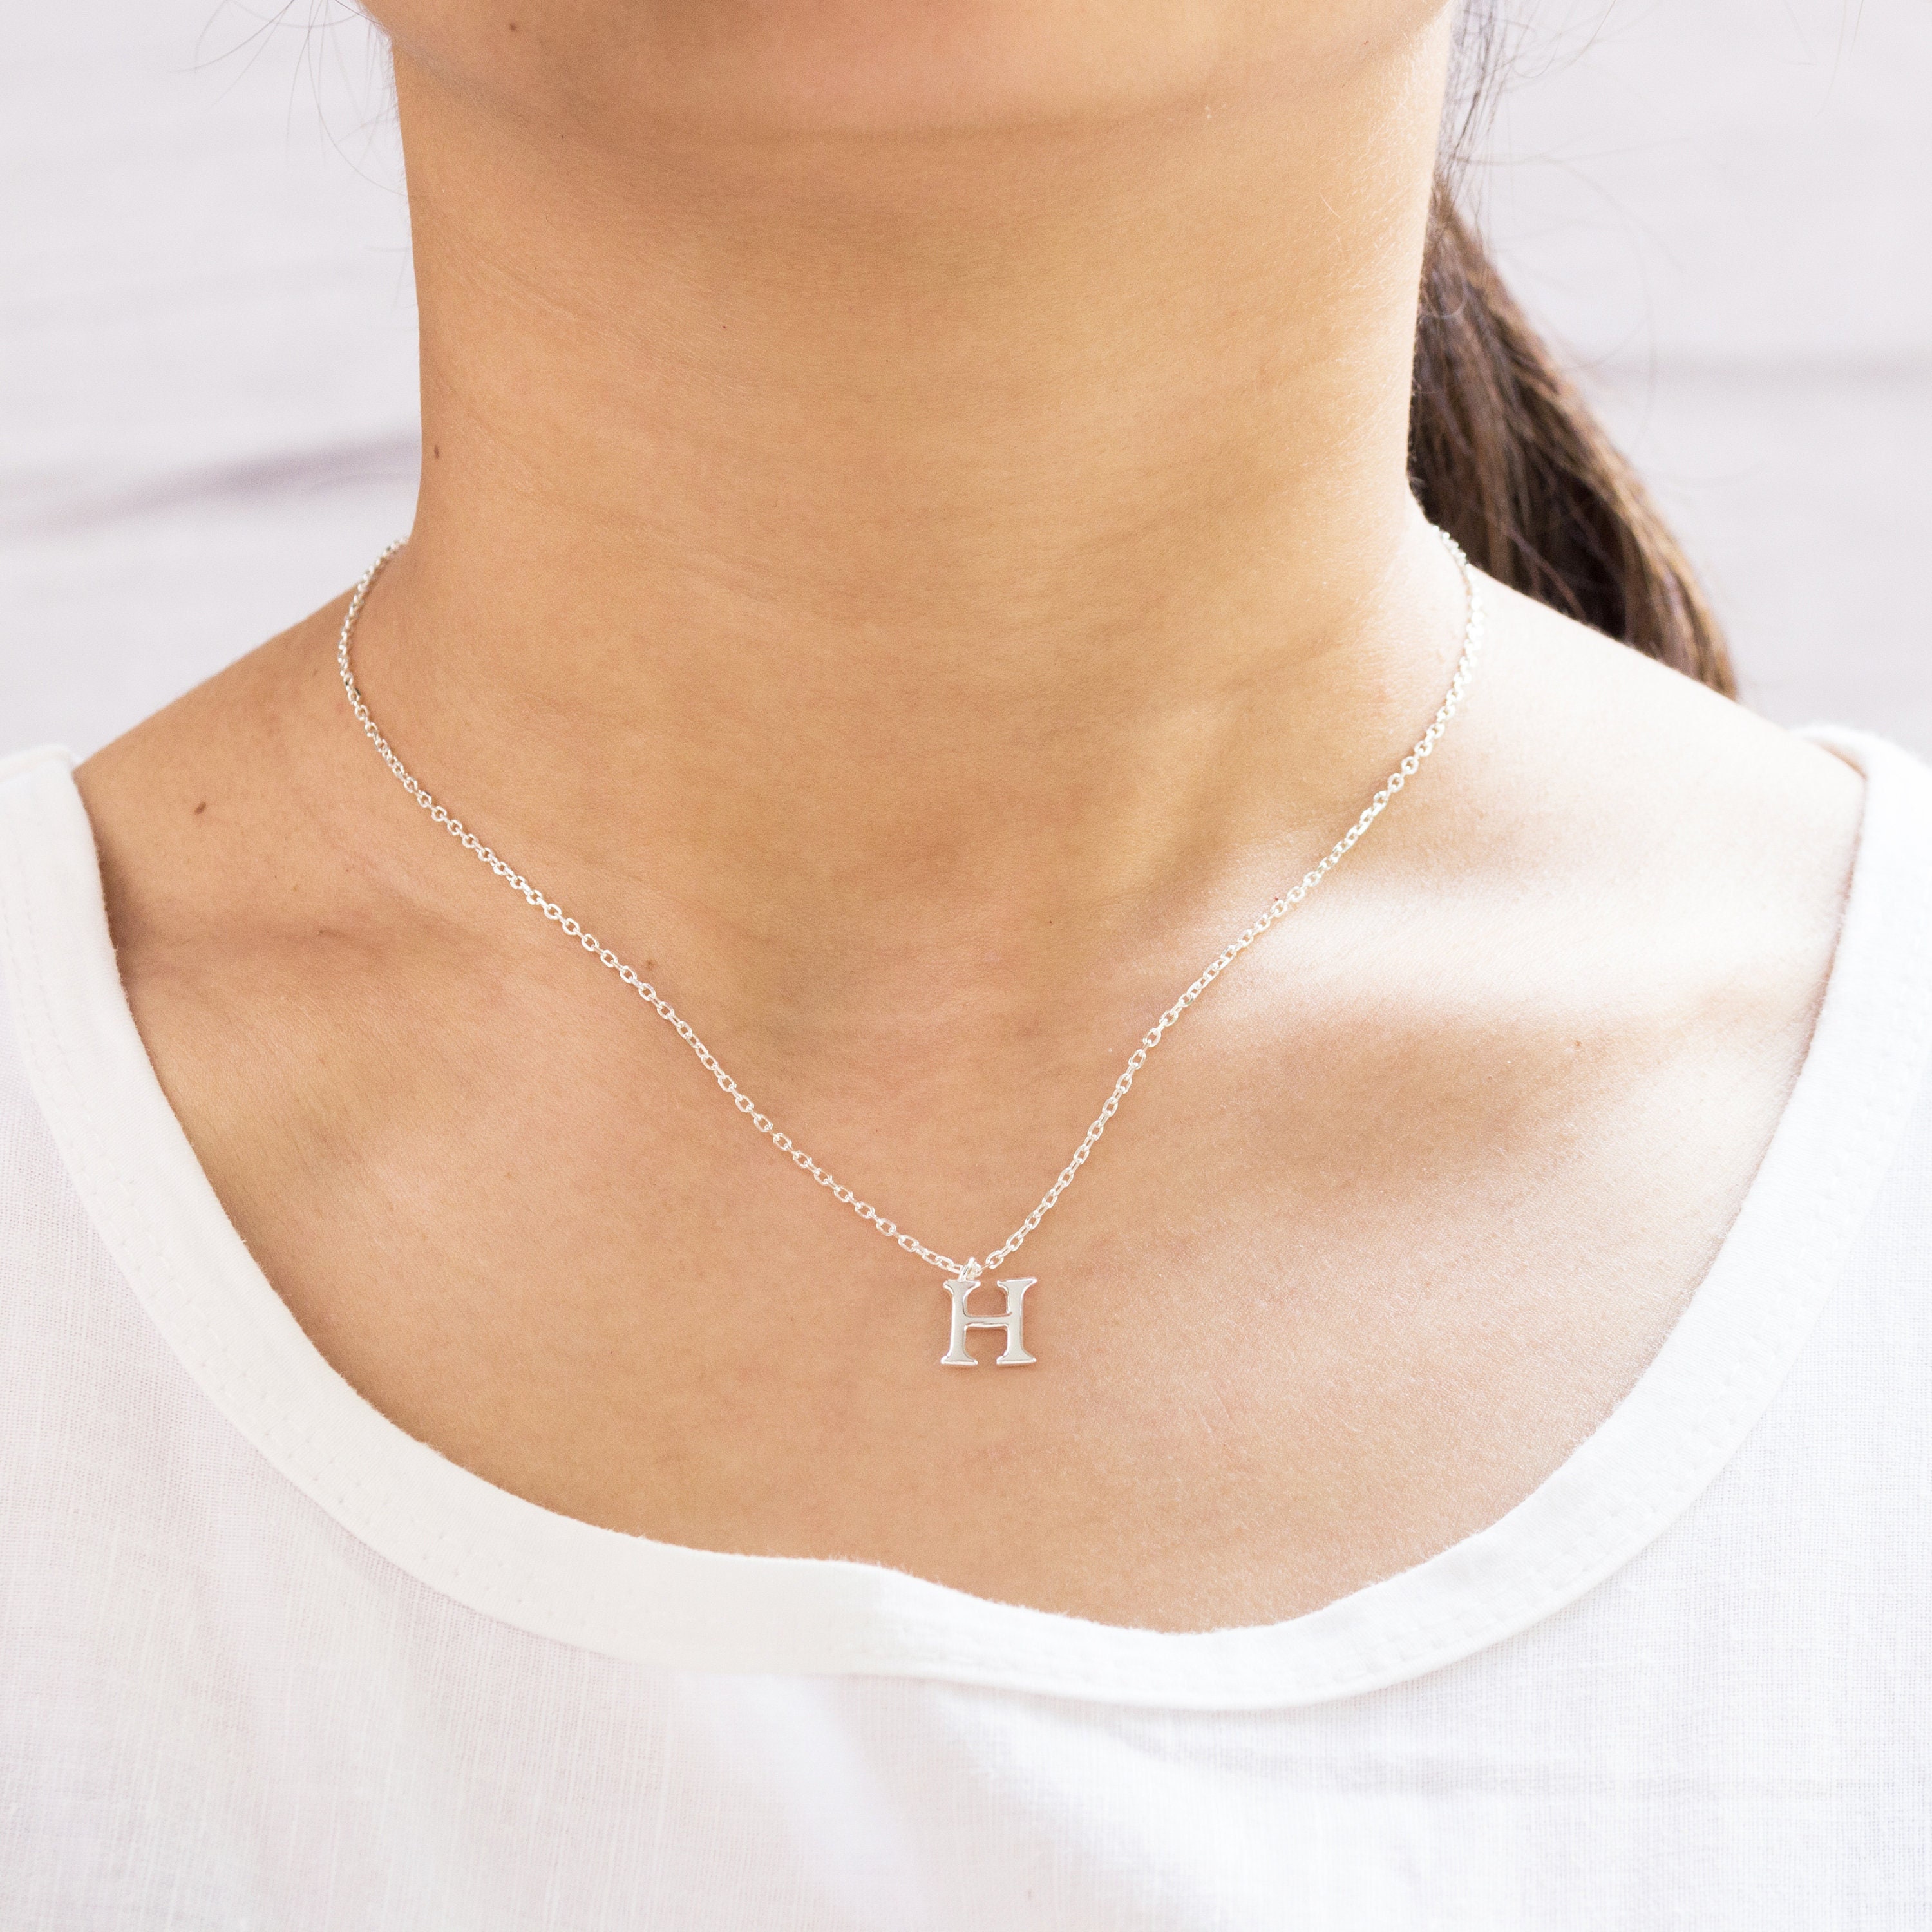 August Woods Gold Pearl H Initial Necklace Argento.com